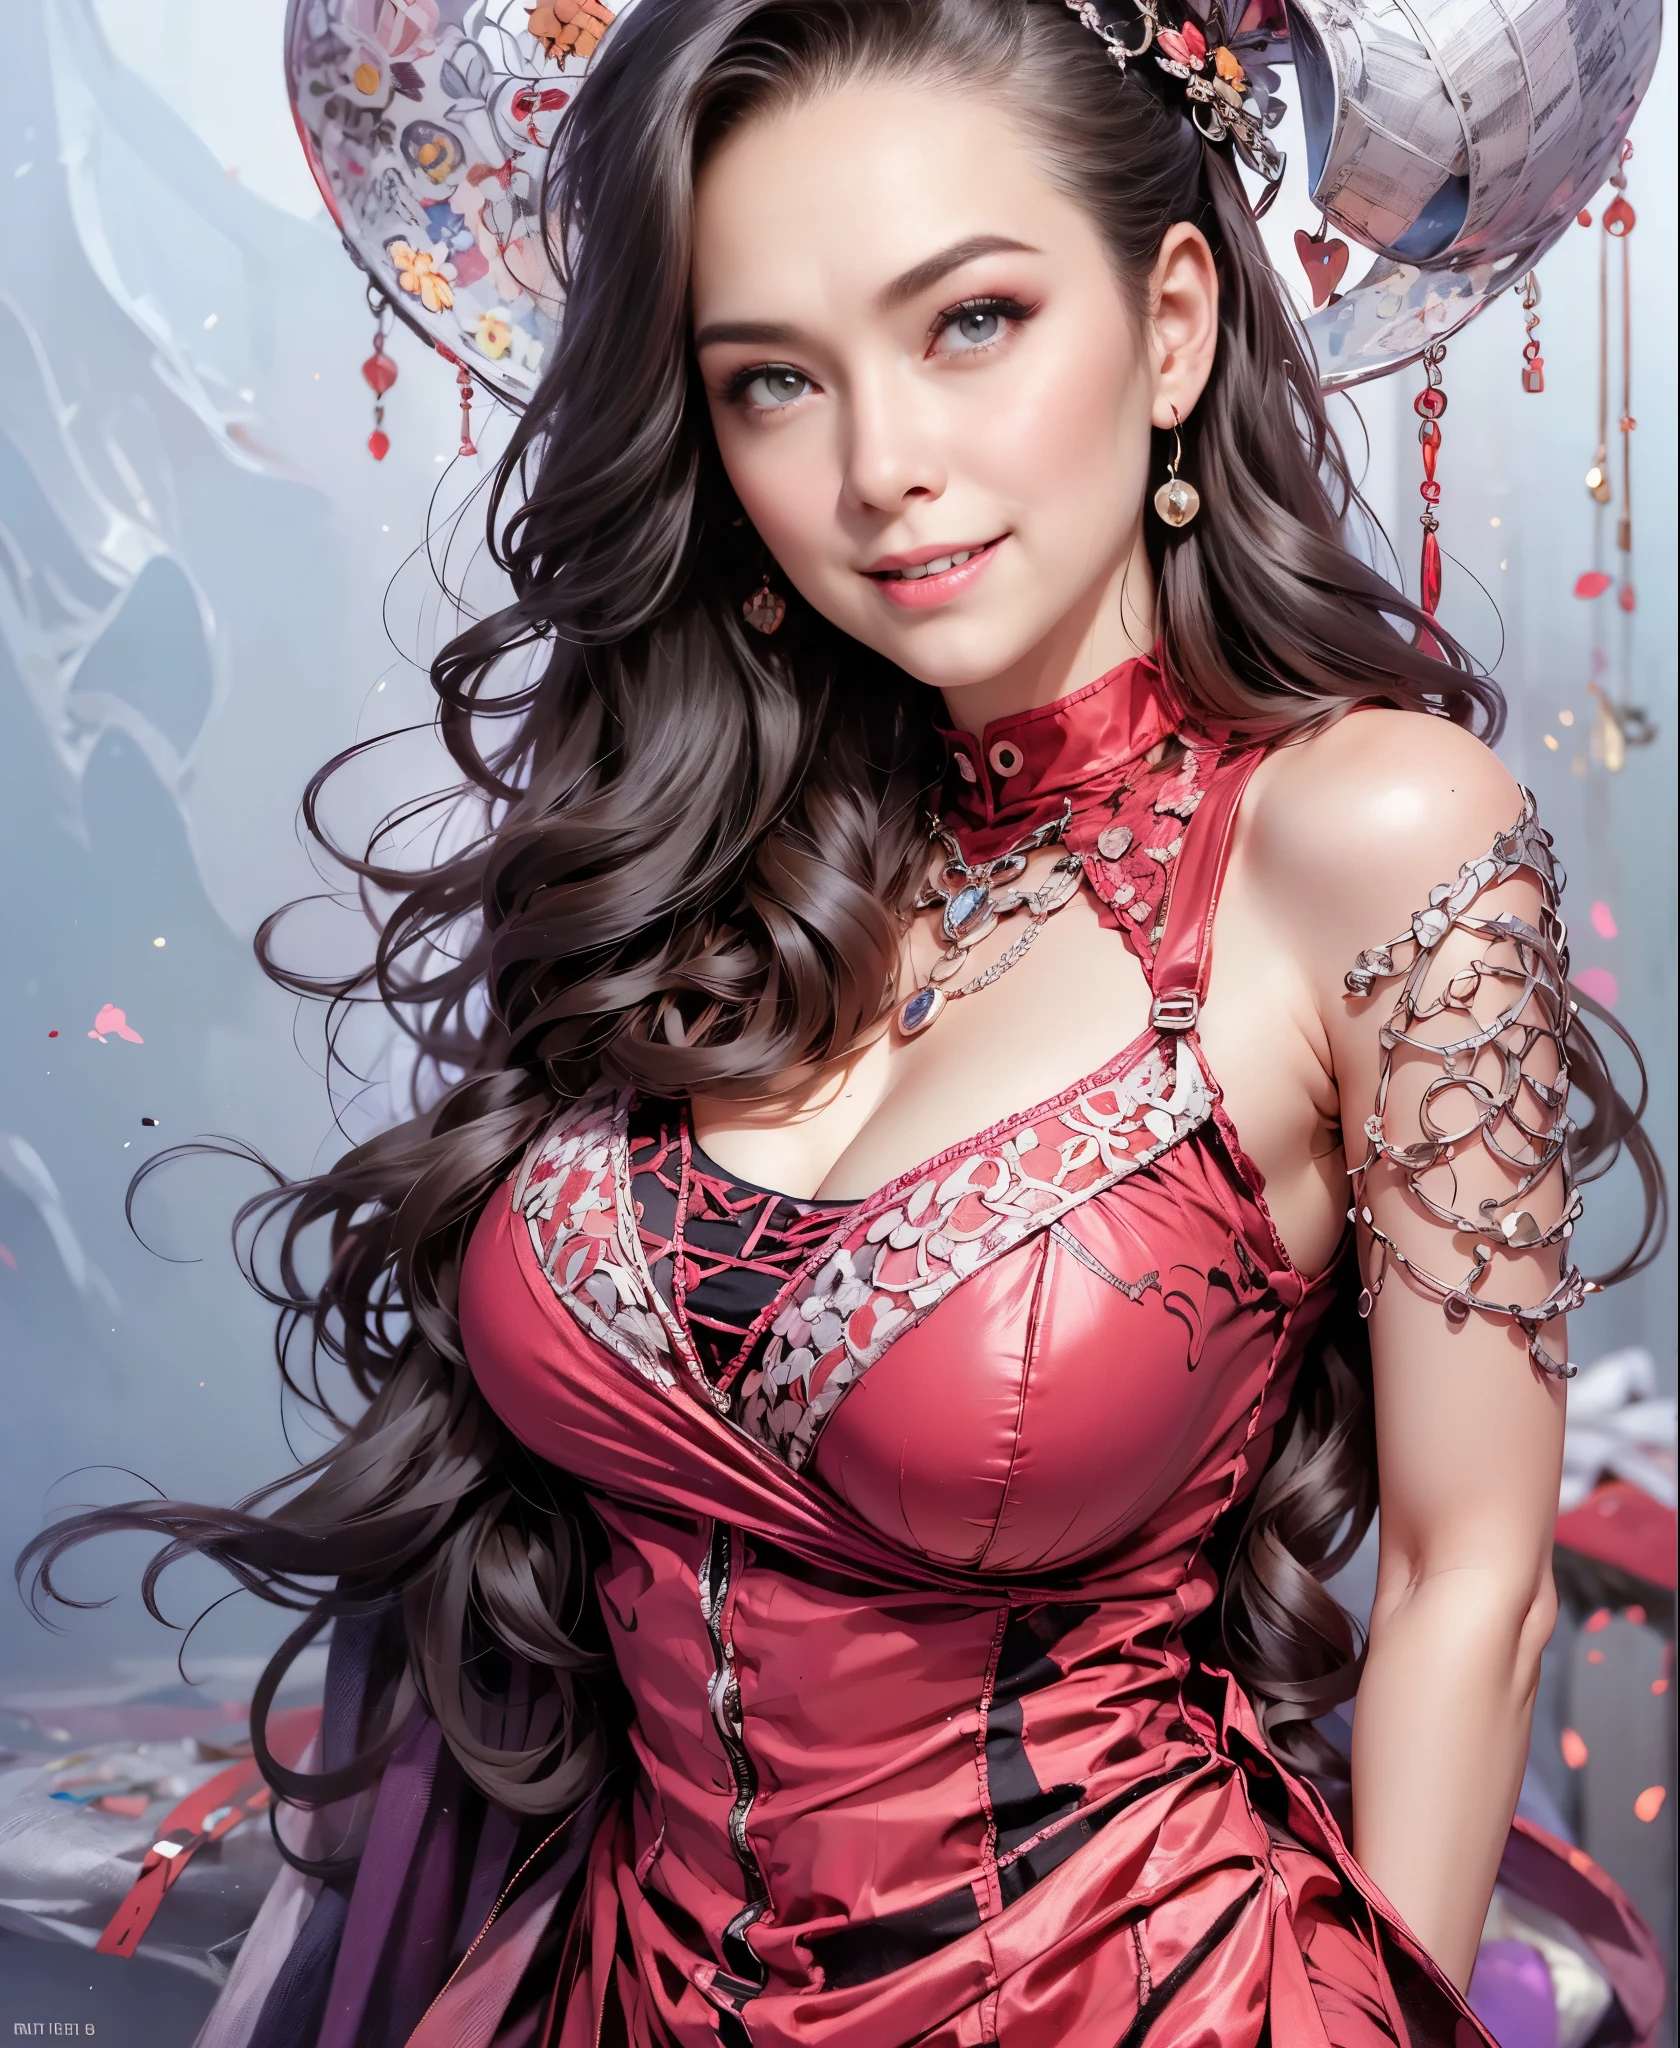 highest quality, masterpiece, 8k、Glossy skin、attention to detail, realistic, 1 girl、super big breasty chest is about to burst、 beautiful hands, sexy, whole body, Blissful smile、red shiny close-fitting dress、cleavage:2.8